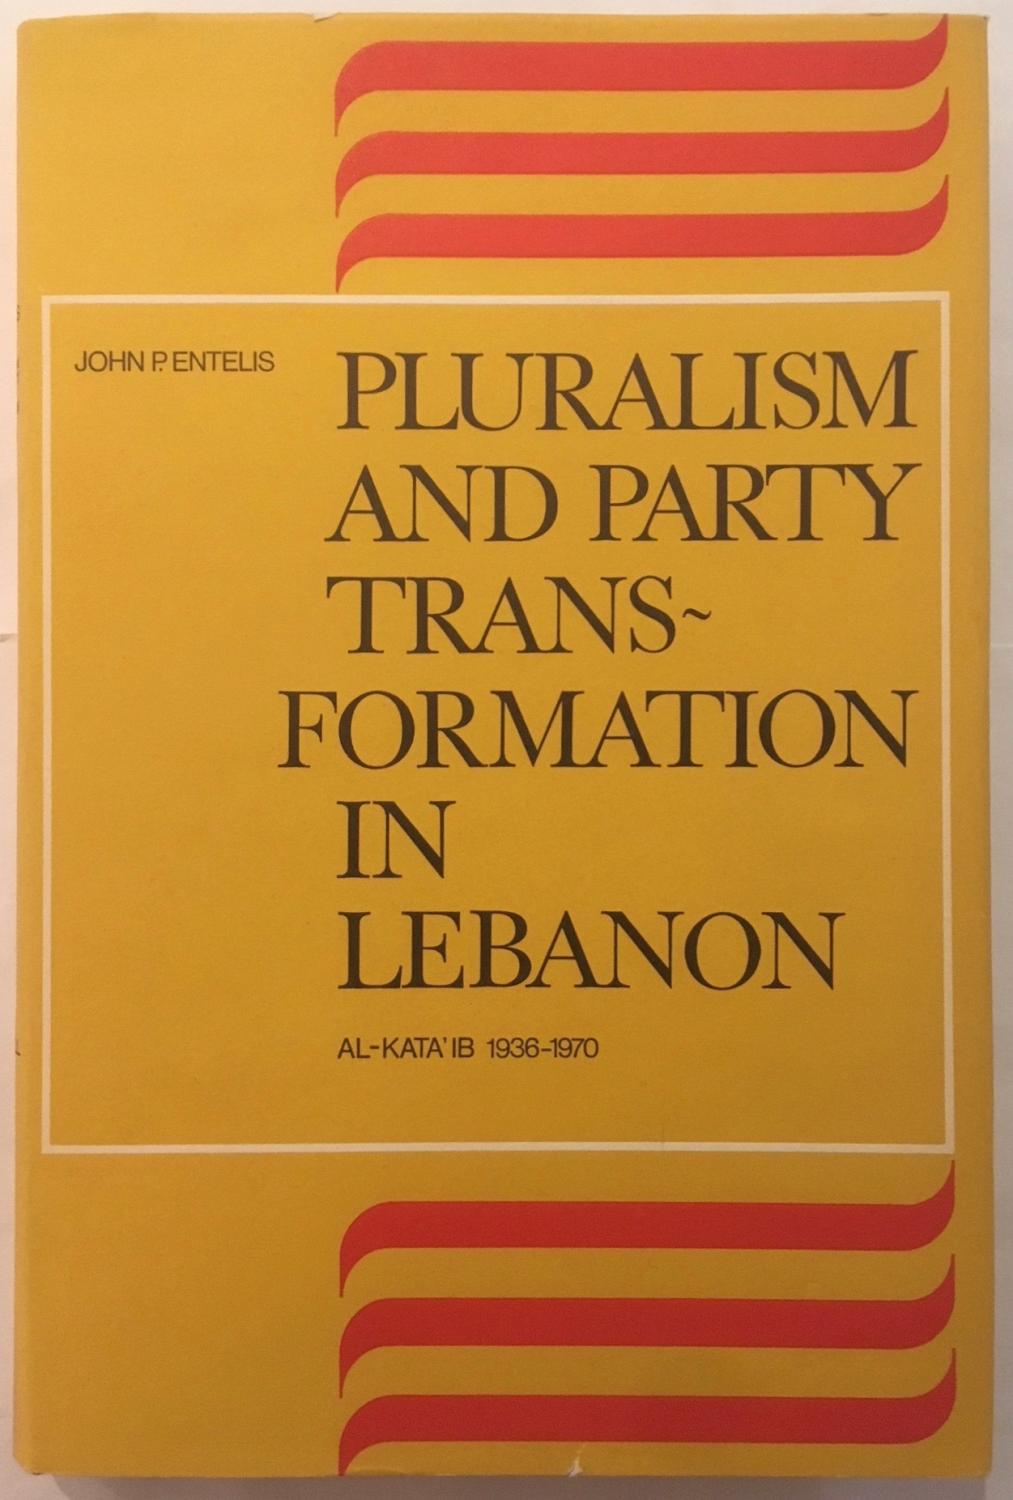 Pluralism and Party Transformation in Lebanon: Al-Kata'ib, 1936-1970 (Social, Economic and Political Studies of the Middle East, v. 10) - John P. Entelis